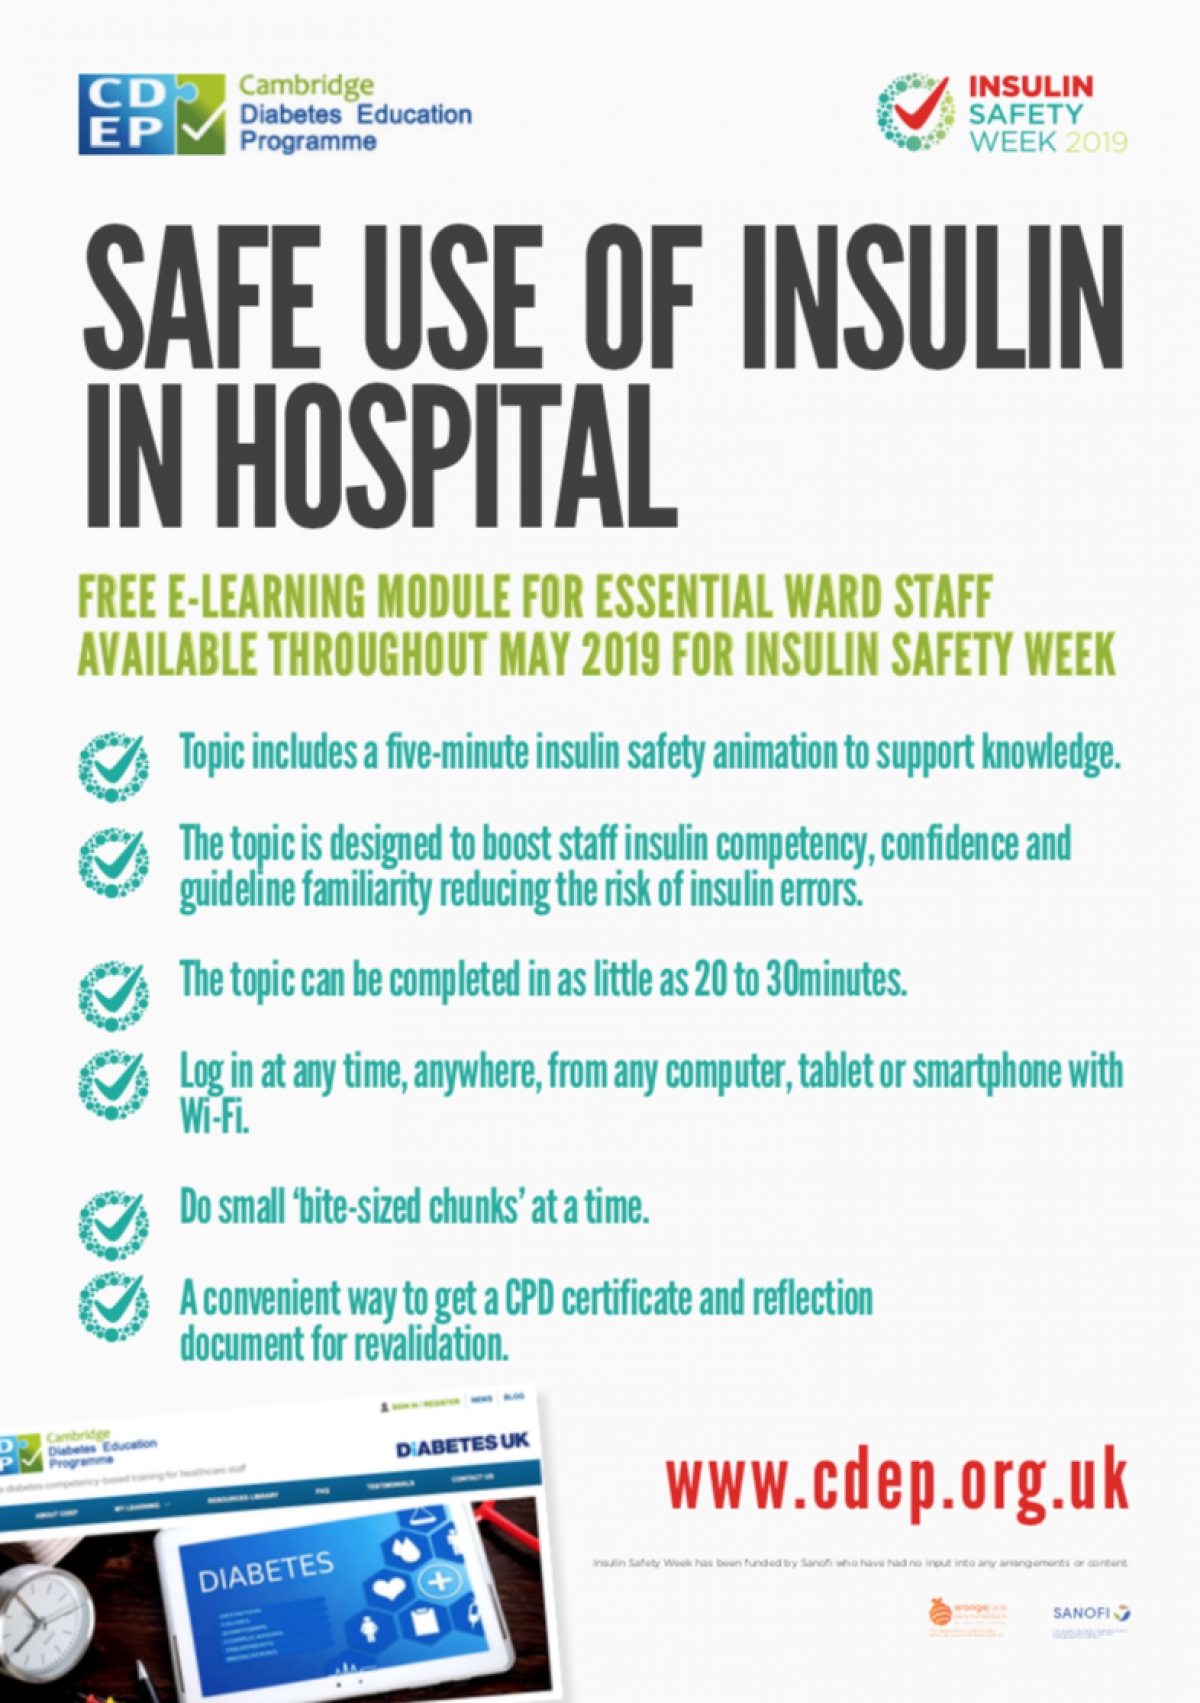 New Safe Use Of Insulin In Hospital Video